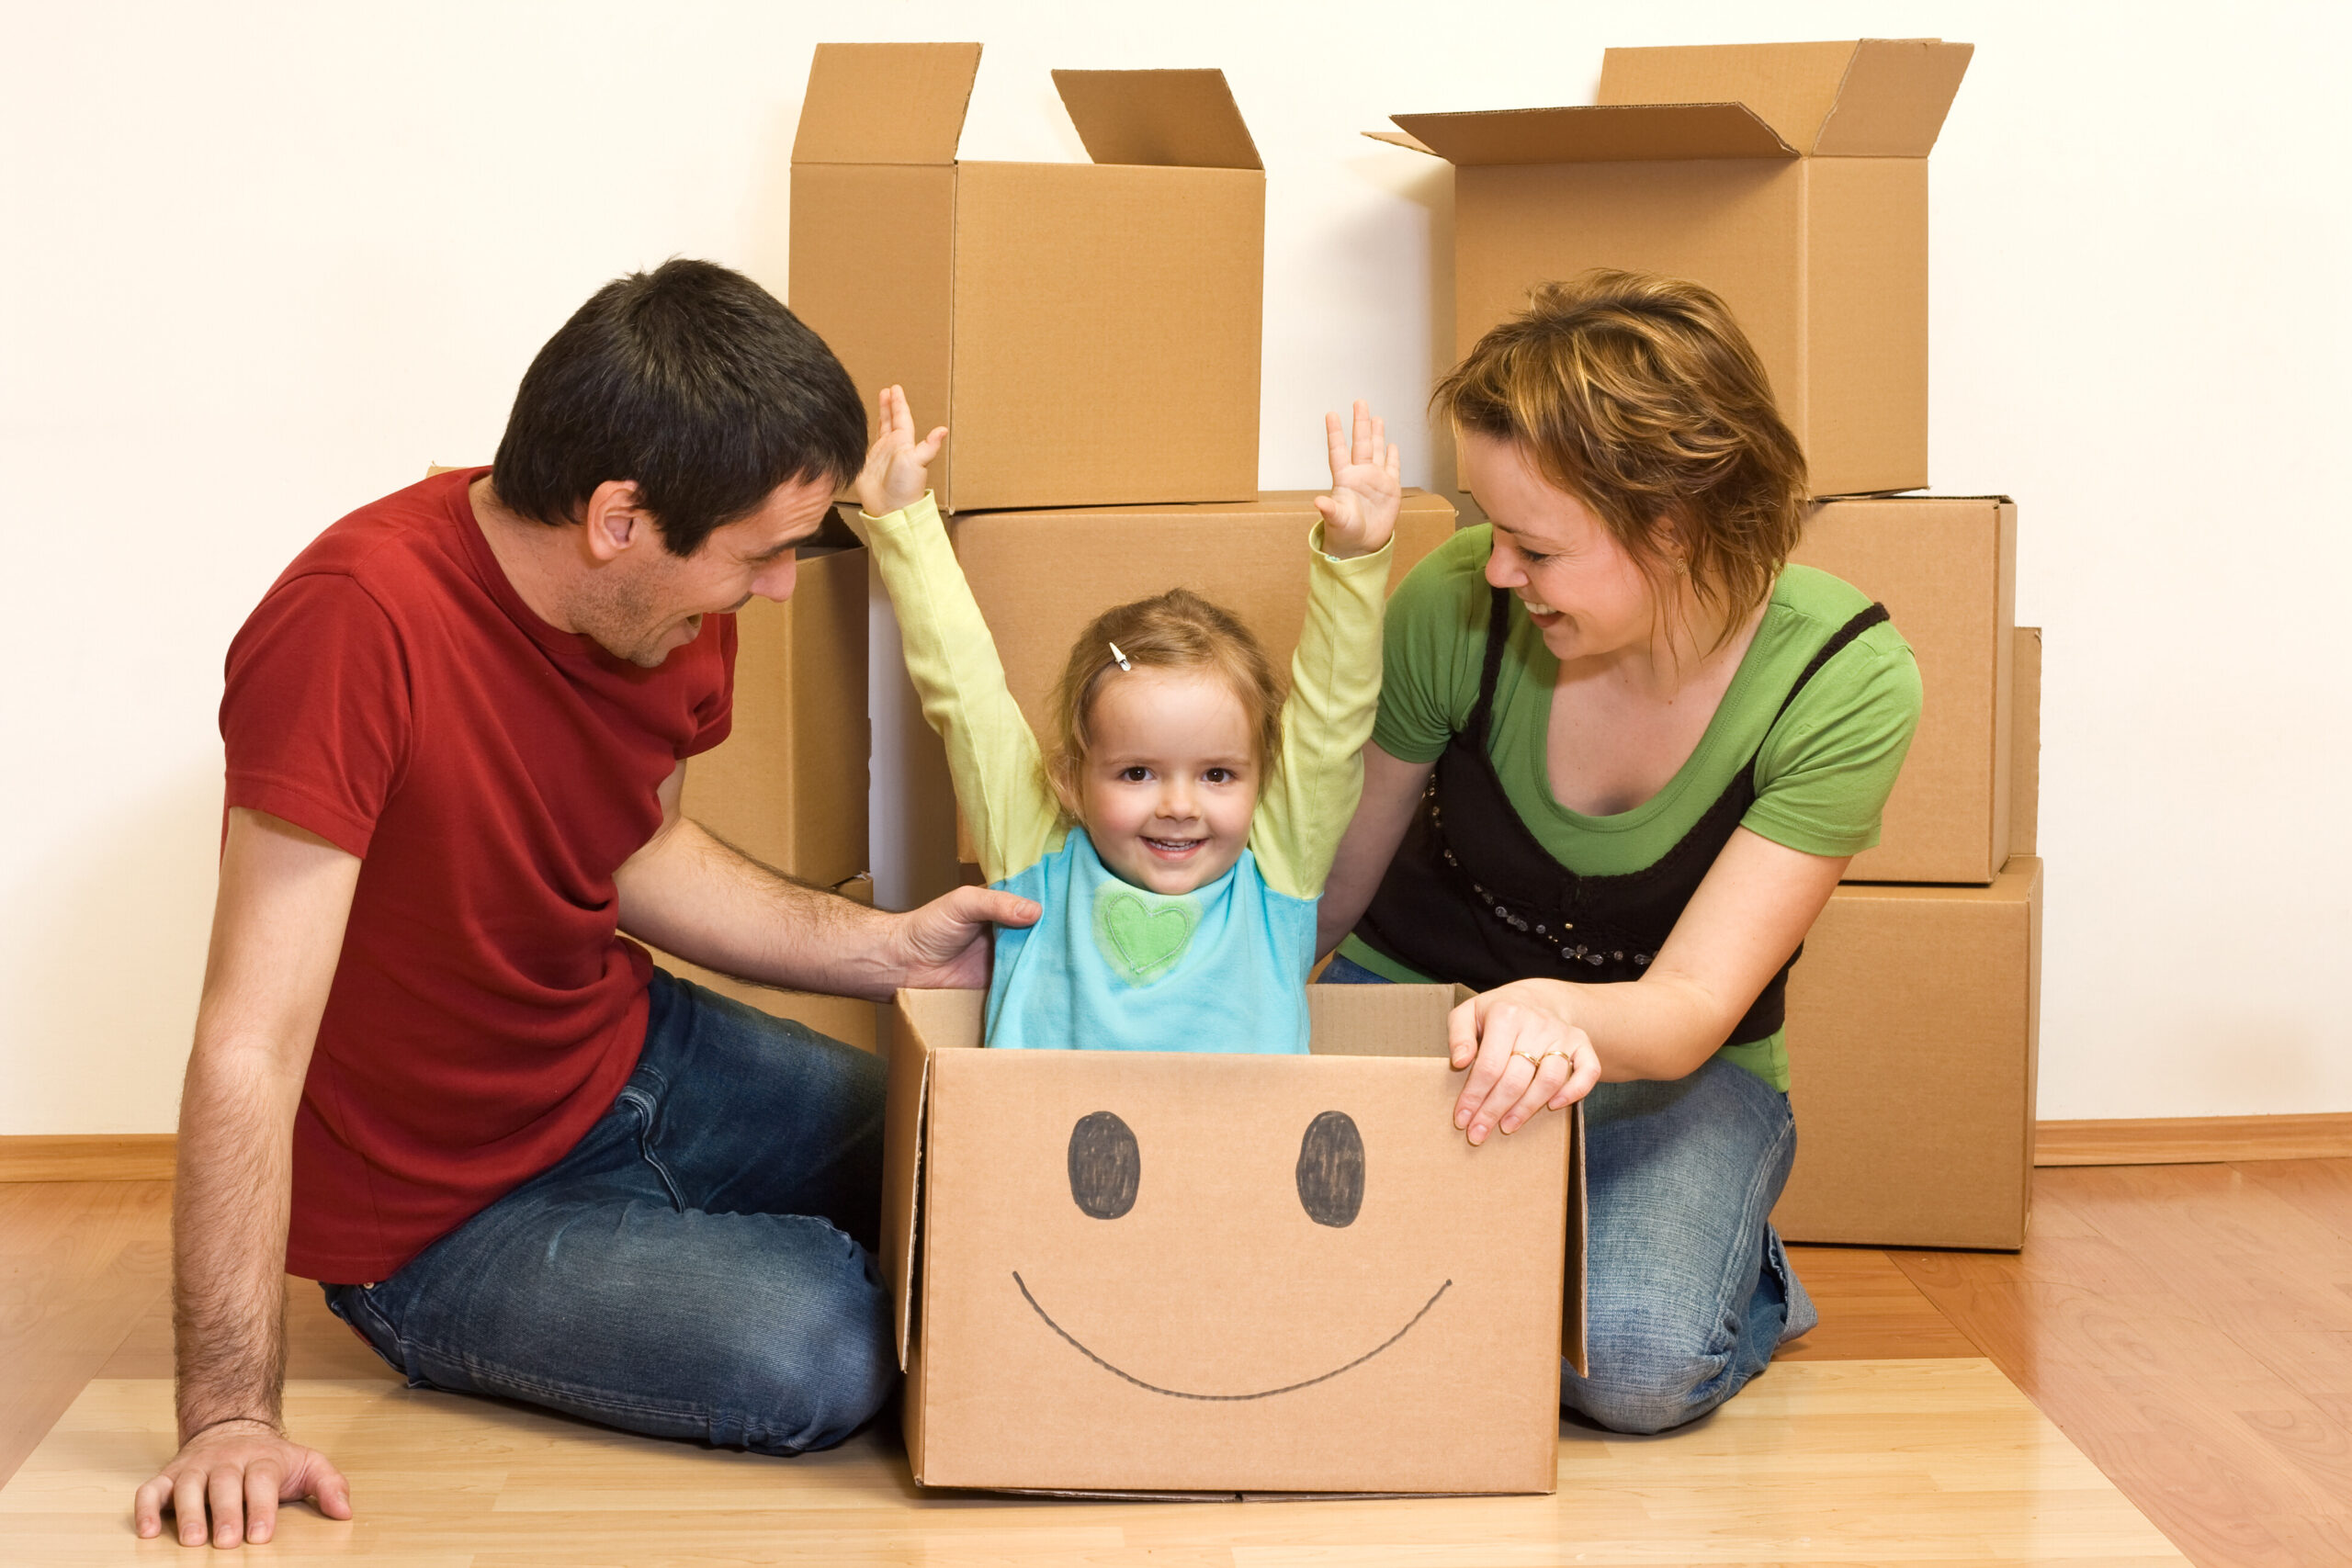 Small child in a moving box with a smiley face on the side. Attentive parents are next to her.